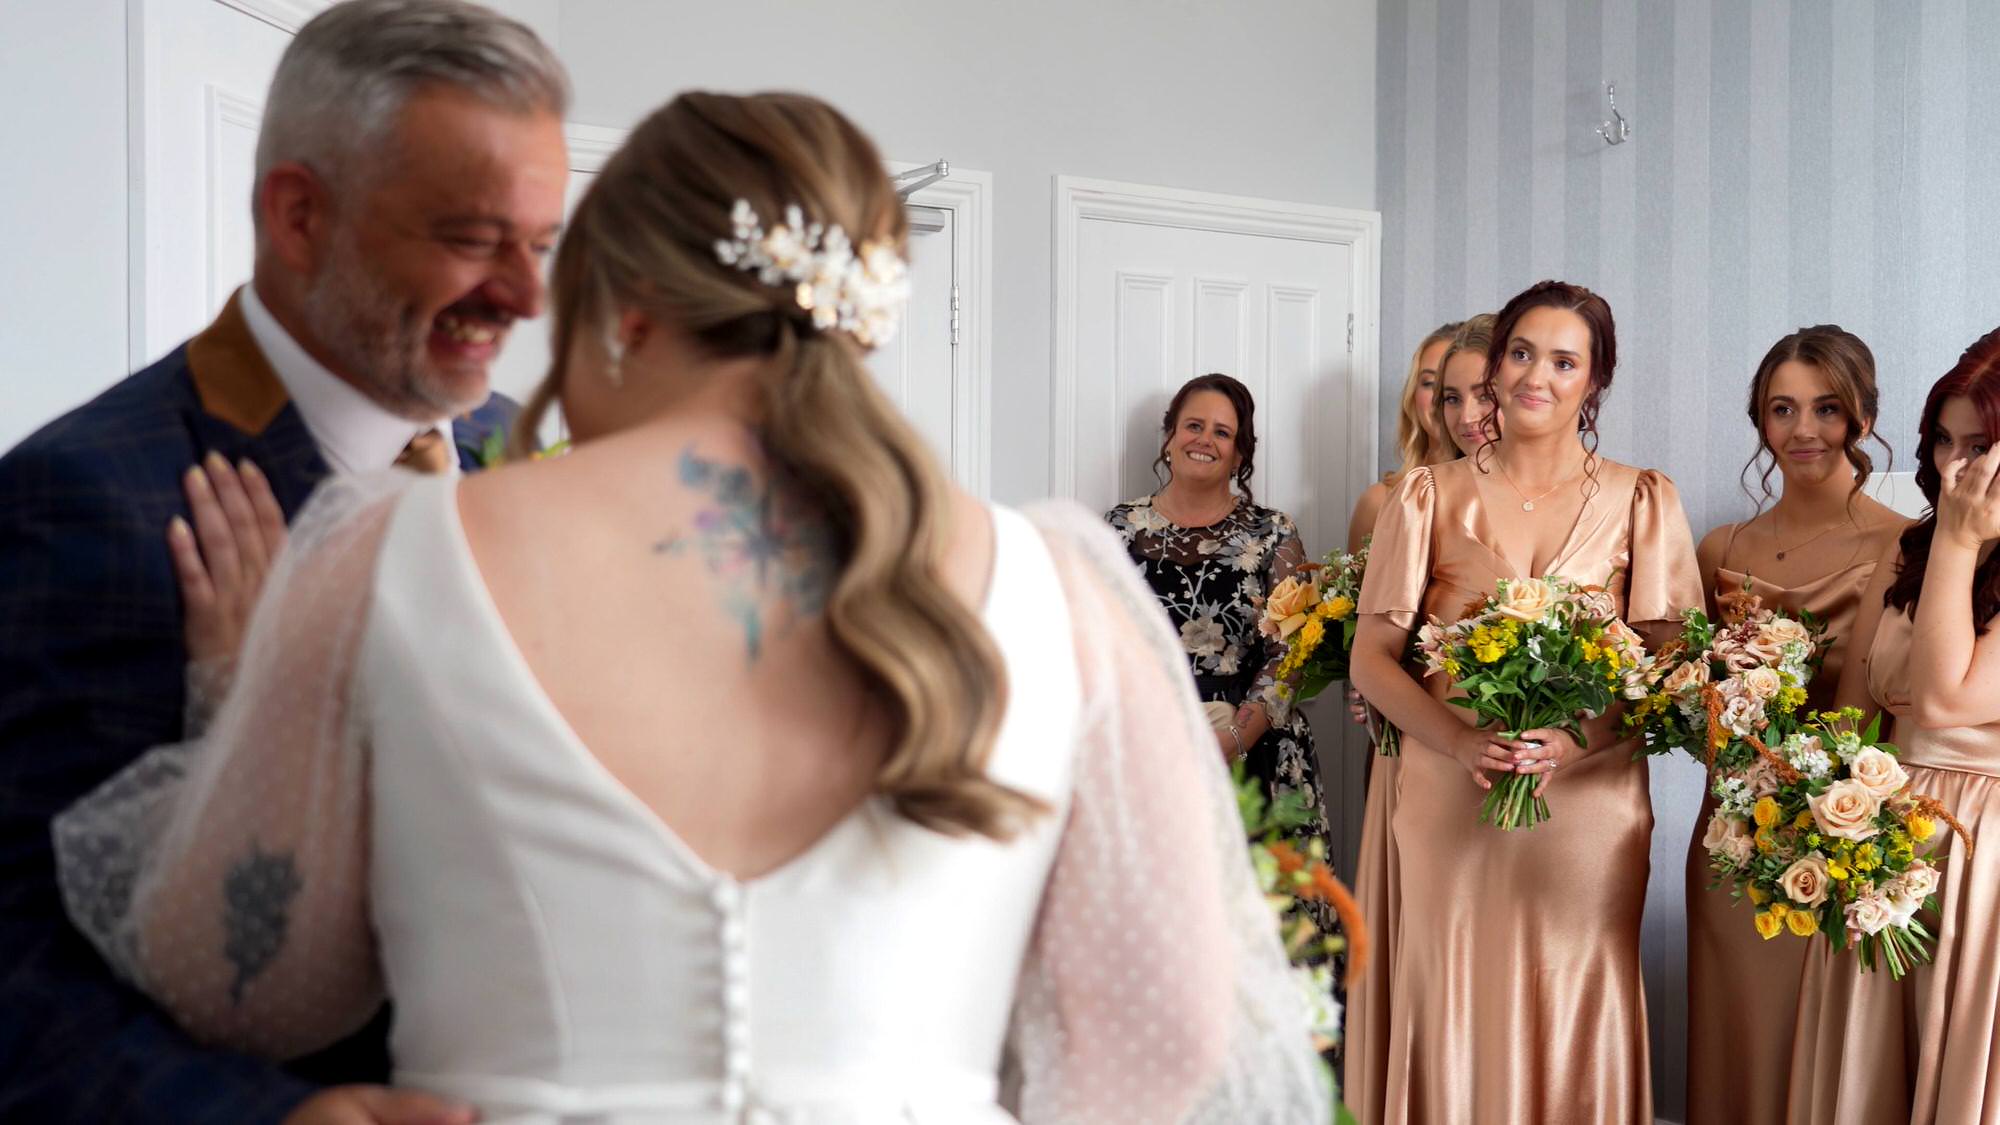 videographer films the bridesmaids wiping tears as the bride laughs with dad